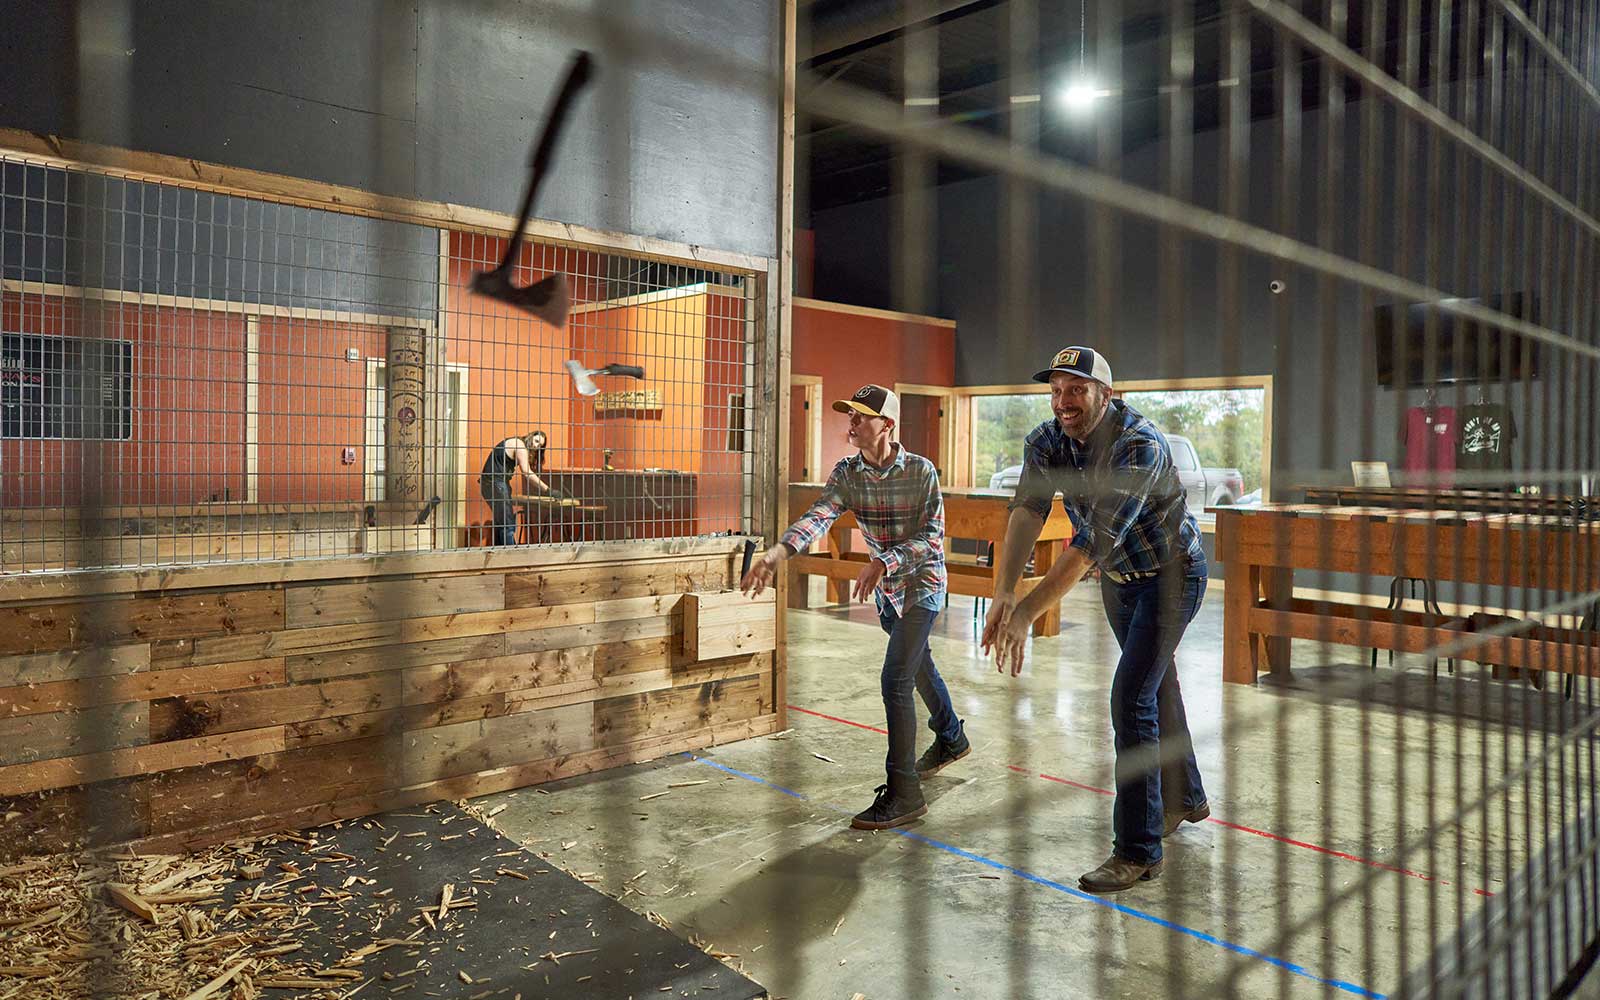 Learn how to throw axes in Hochatown, Oklahoma. 